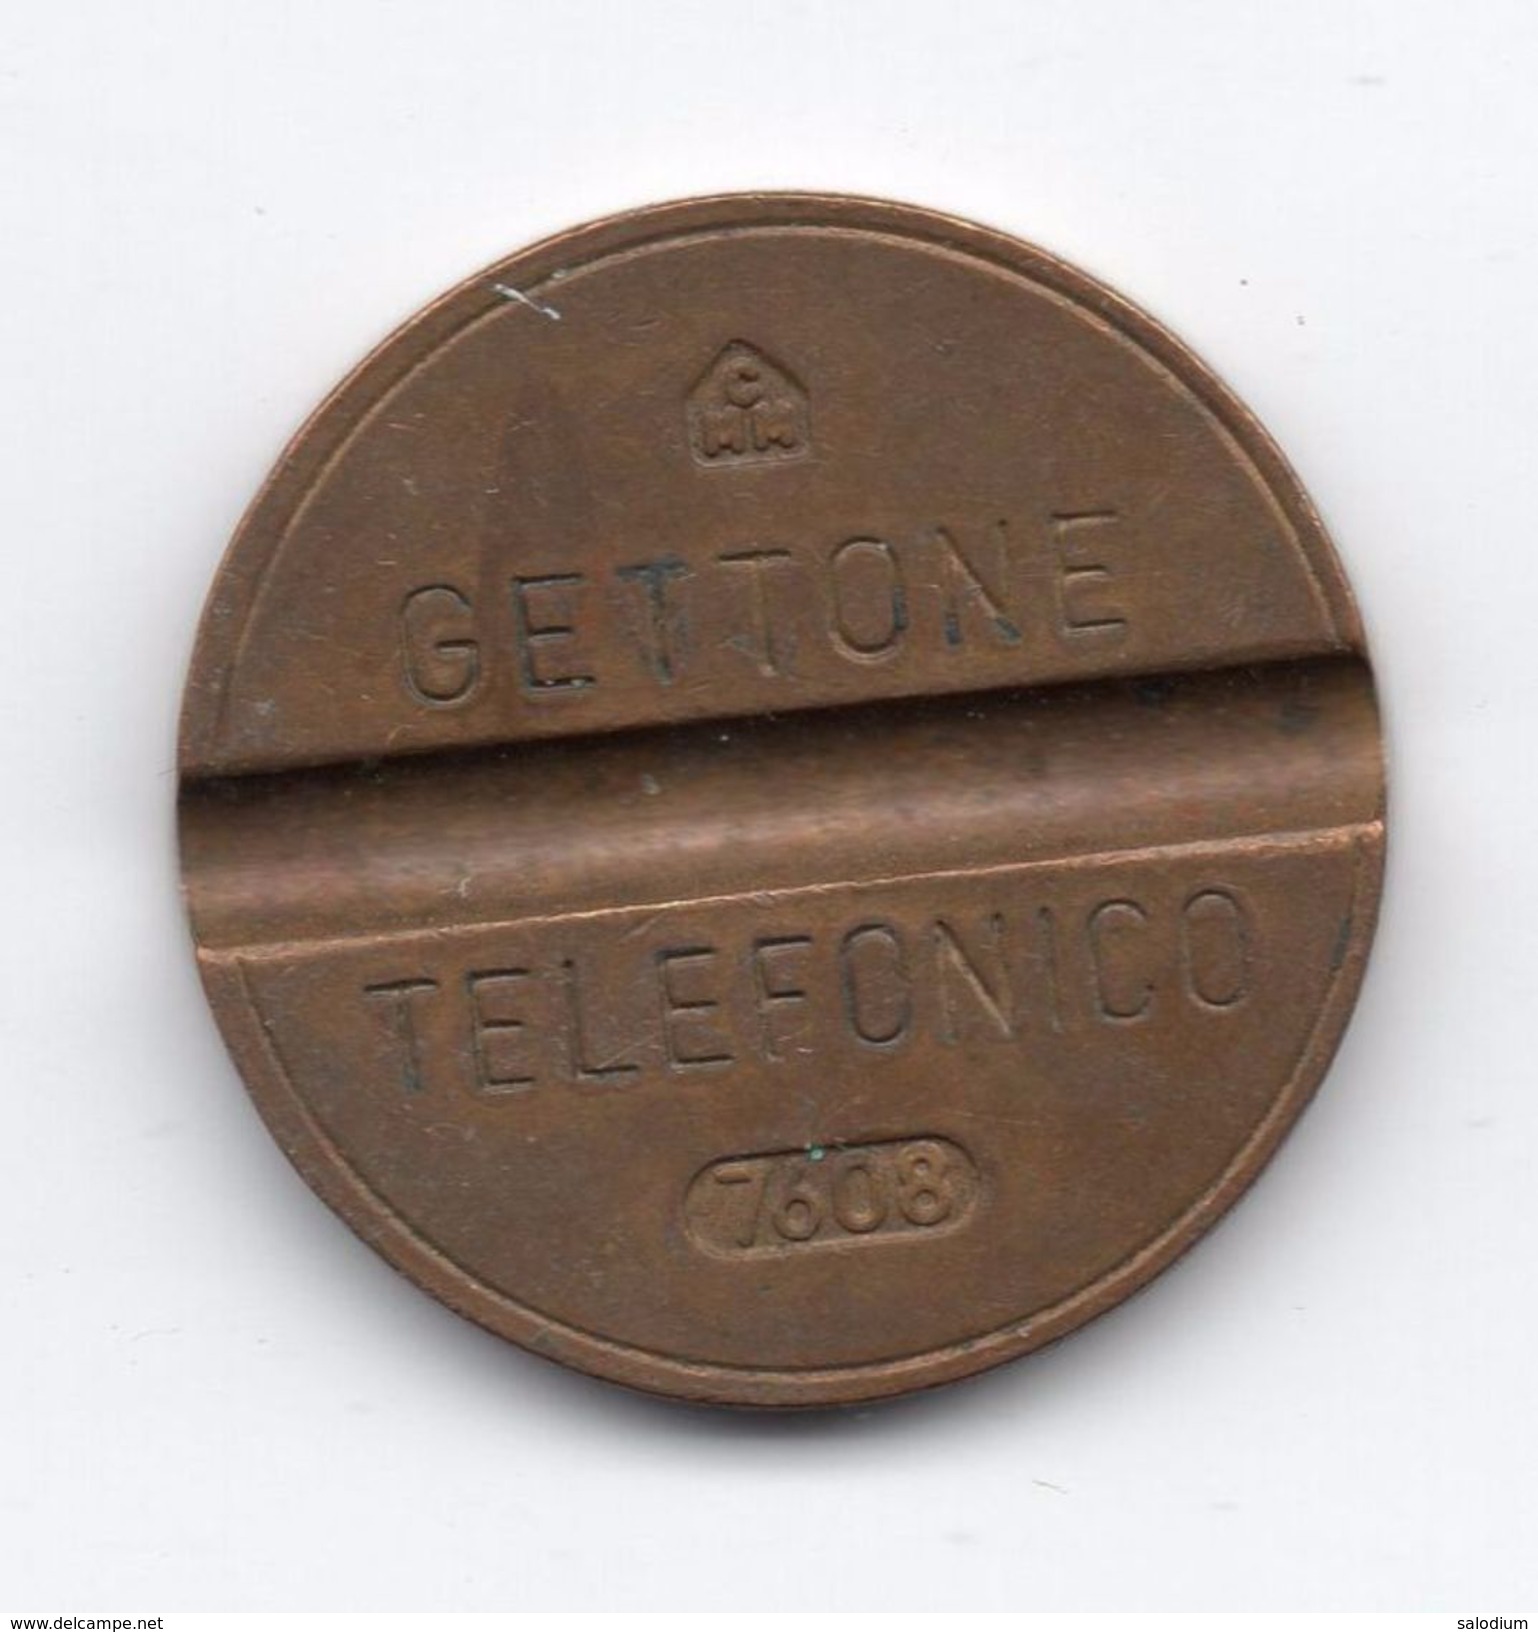 Gettone Telefonico 7608 Token Telephone - (Id-867) - Professionals/Firms